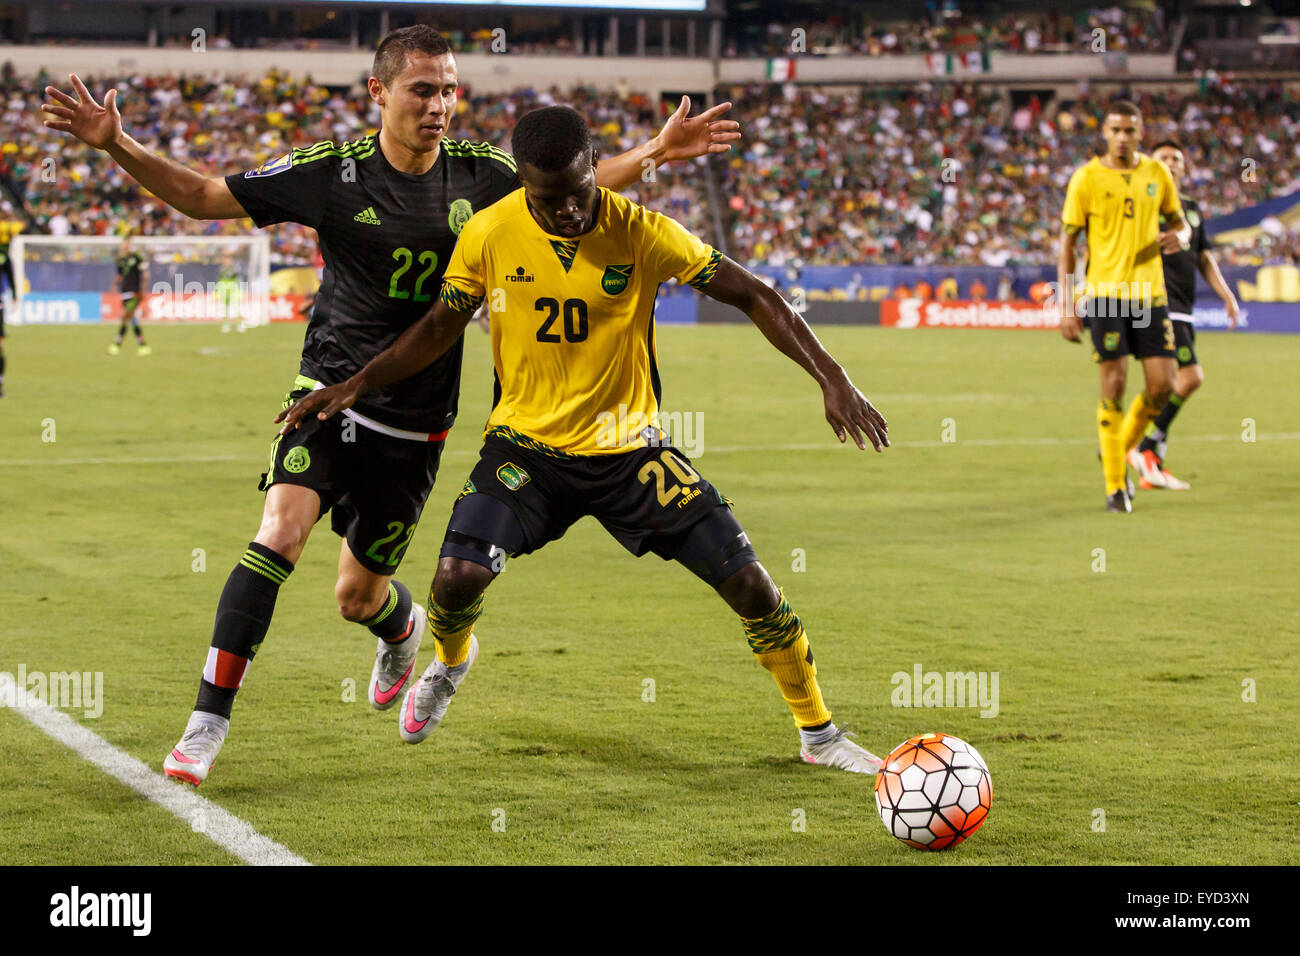 July 26, 2015: Mexico defender Paul Aguilar (22) battles with Jamaica defender Kemar Lawrence (20) for the ball during the CONCACAF Gold Cup 2015 Final match between Jamaica and Mexico at Lincoln Financial Field in Philadelphia, Pennsylvania. Mexico won 3-1. Christopher Szagola/CSM Stock Photo